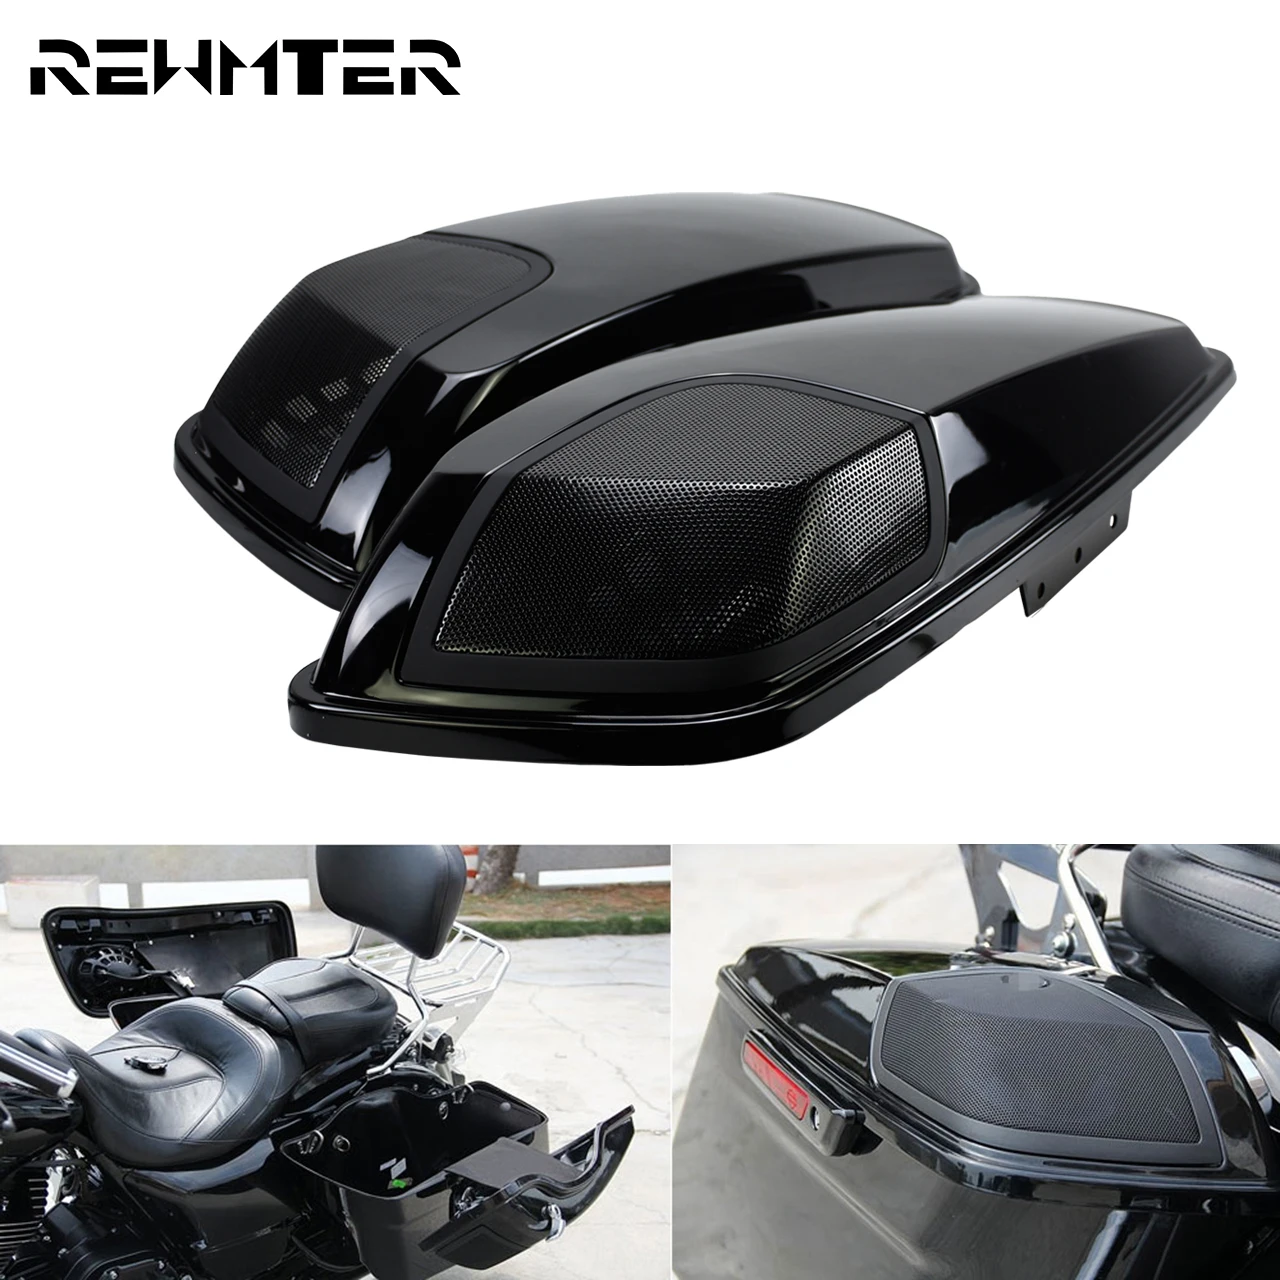 

Motorcycle Black Saddlebag Lid Speaker Cutouts Grill Cover For Harley Touring 2014-2019 Road king Electra Street Glide FLHX